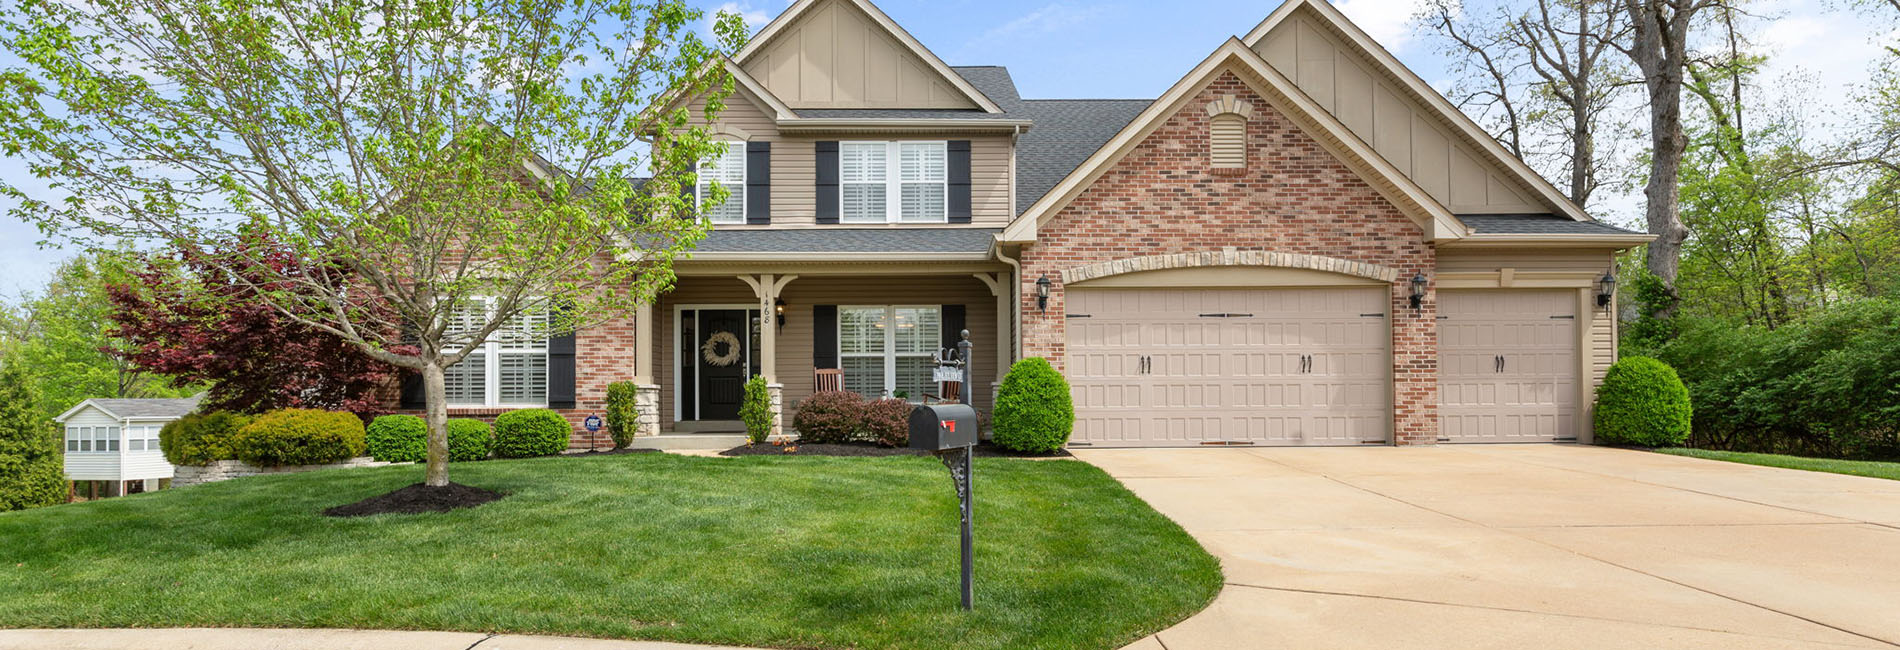 1468 Ivy View Court | Welcome Home!